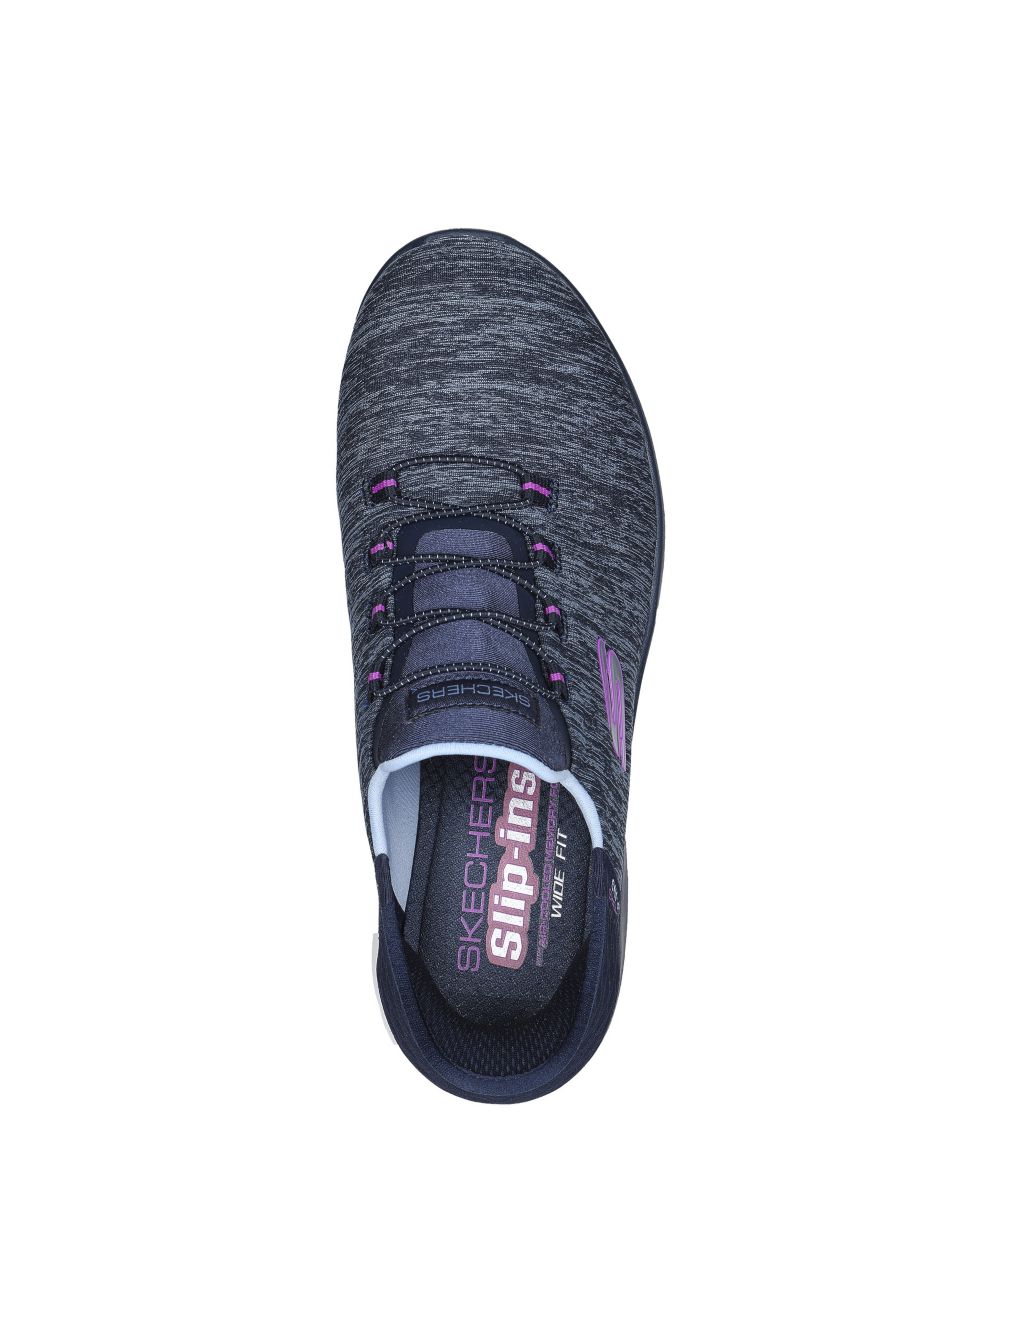 Wide Fit Summits Dazzling Haze Slip-ins Trainers 4 of 5